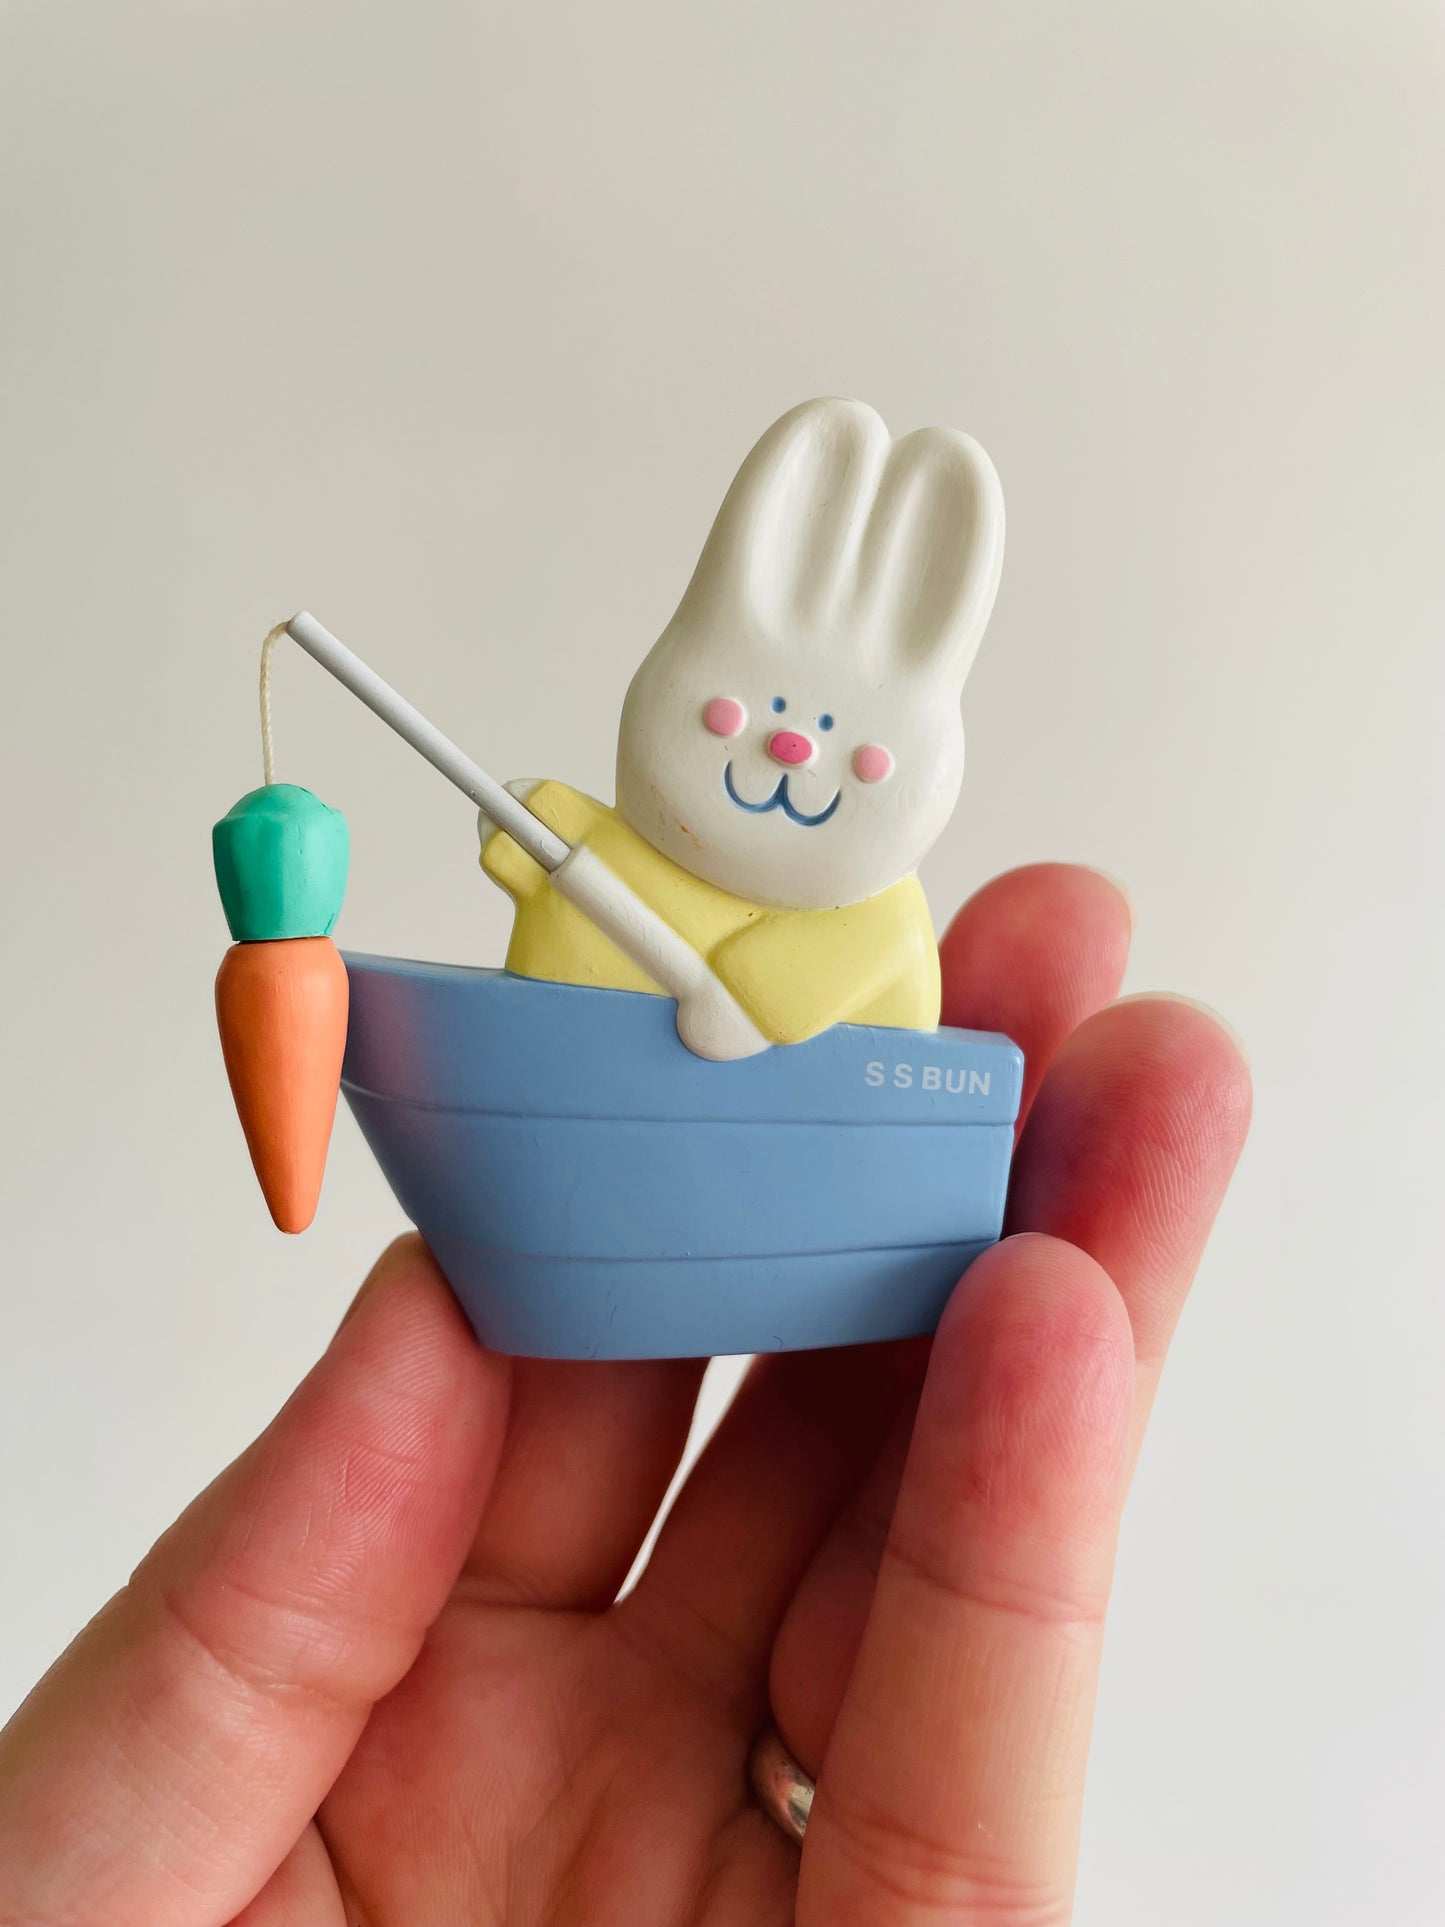 Easter Holiday Pin - Bunny Fishing with Carrot in SS Bun Boat - Hallmark Cards 1990